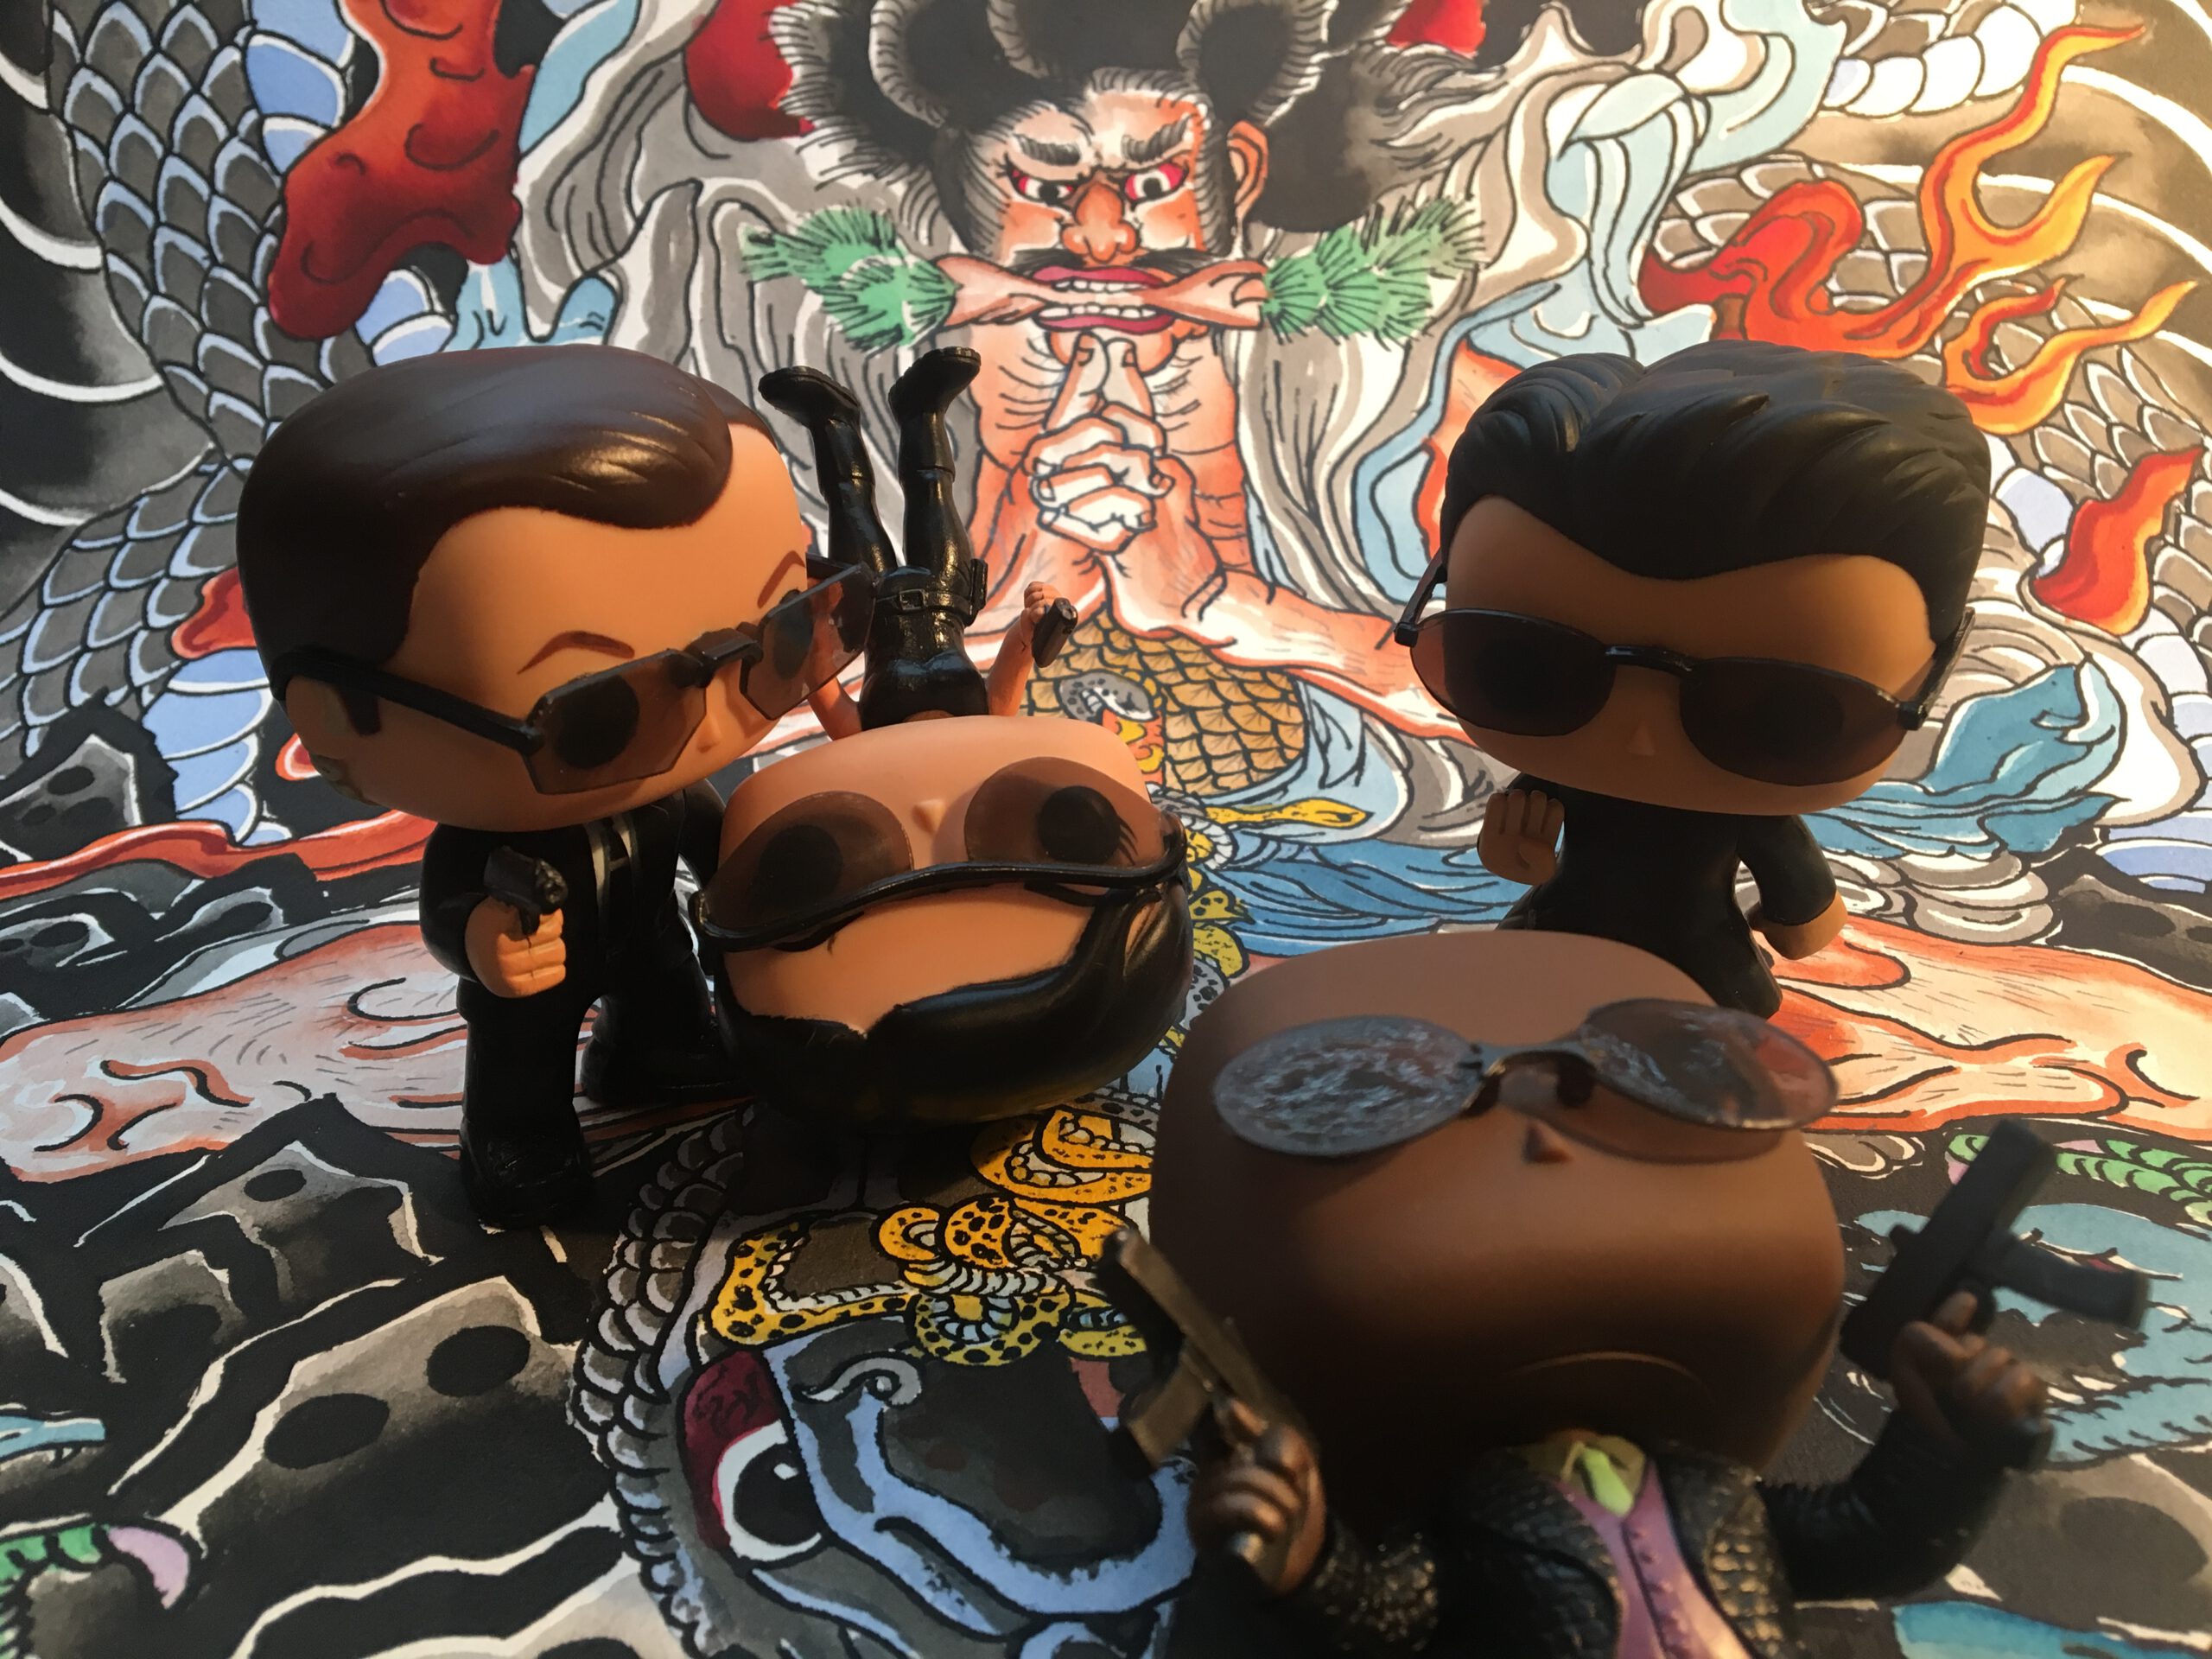 Four Funko Pop figures from the matrix movie in front of the Kidumaru painting by Gordon Claus